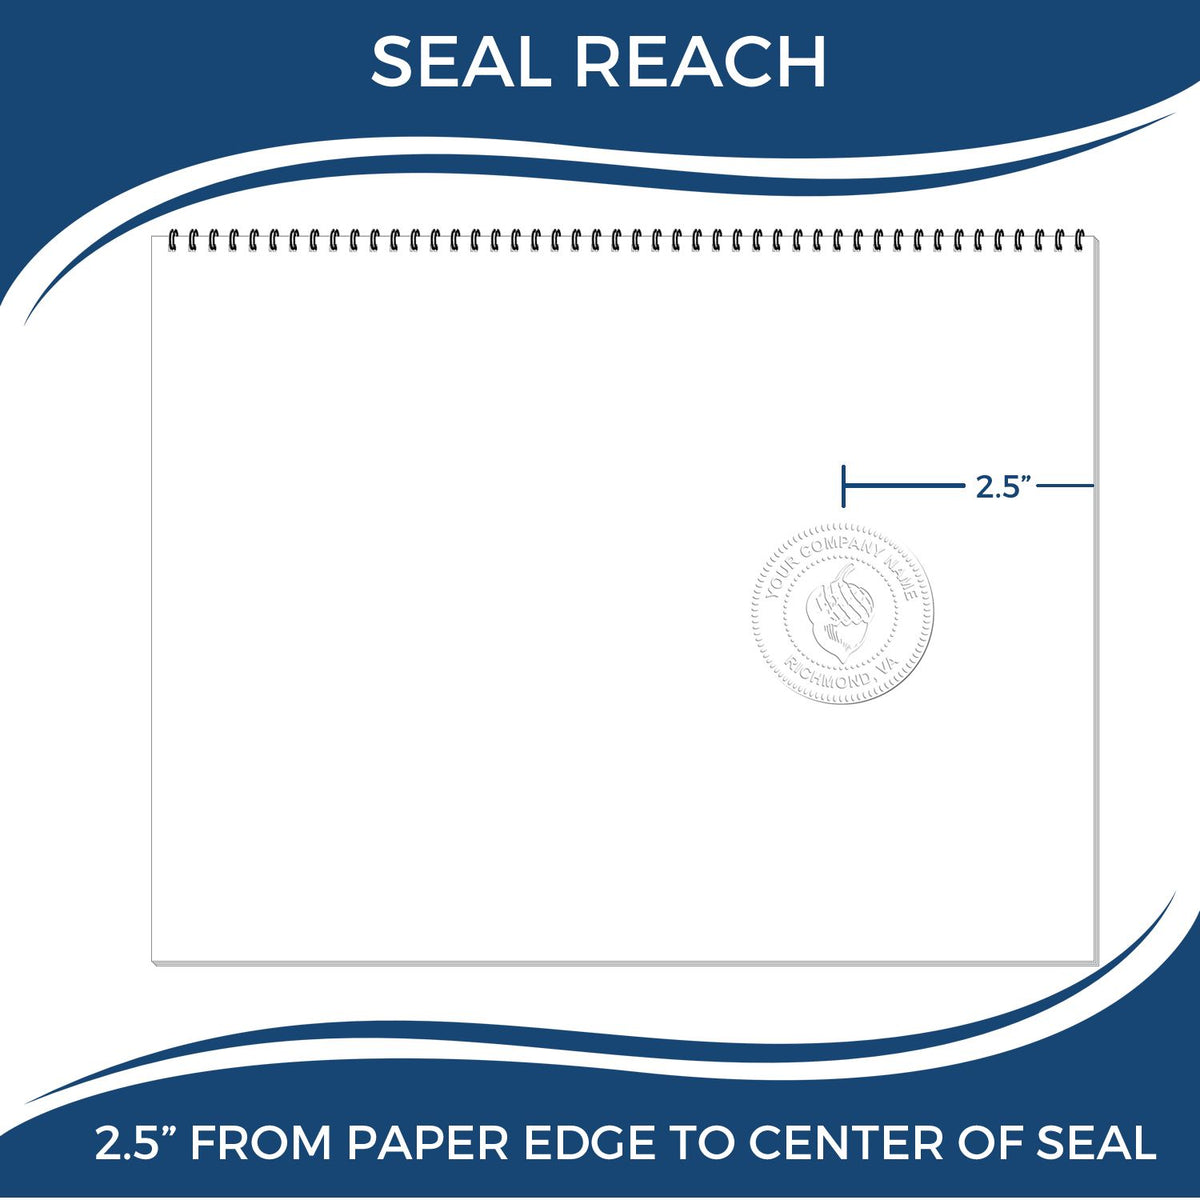 An infographic showing the seal reach which is represented by a ruler and a miniature seal image of the Long Reach Arizona Land Surveyor Seal